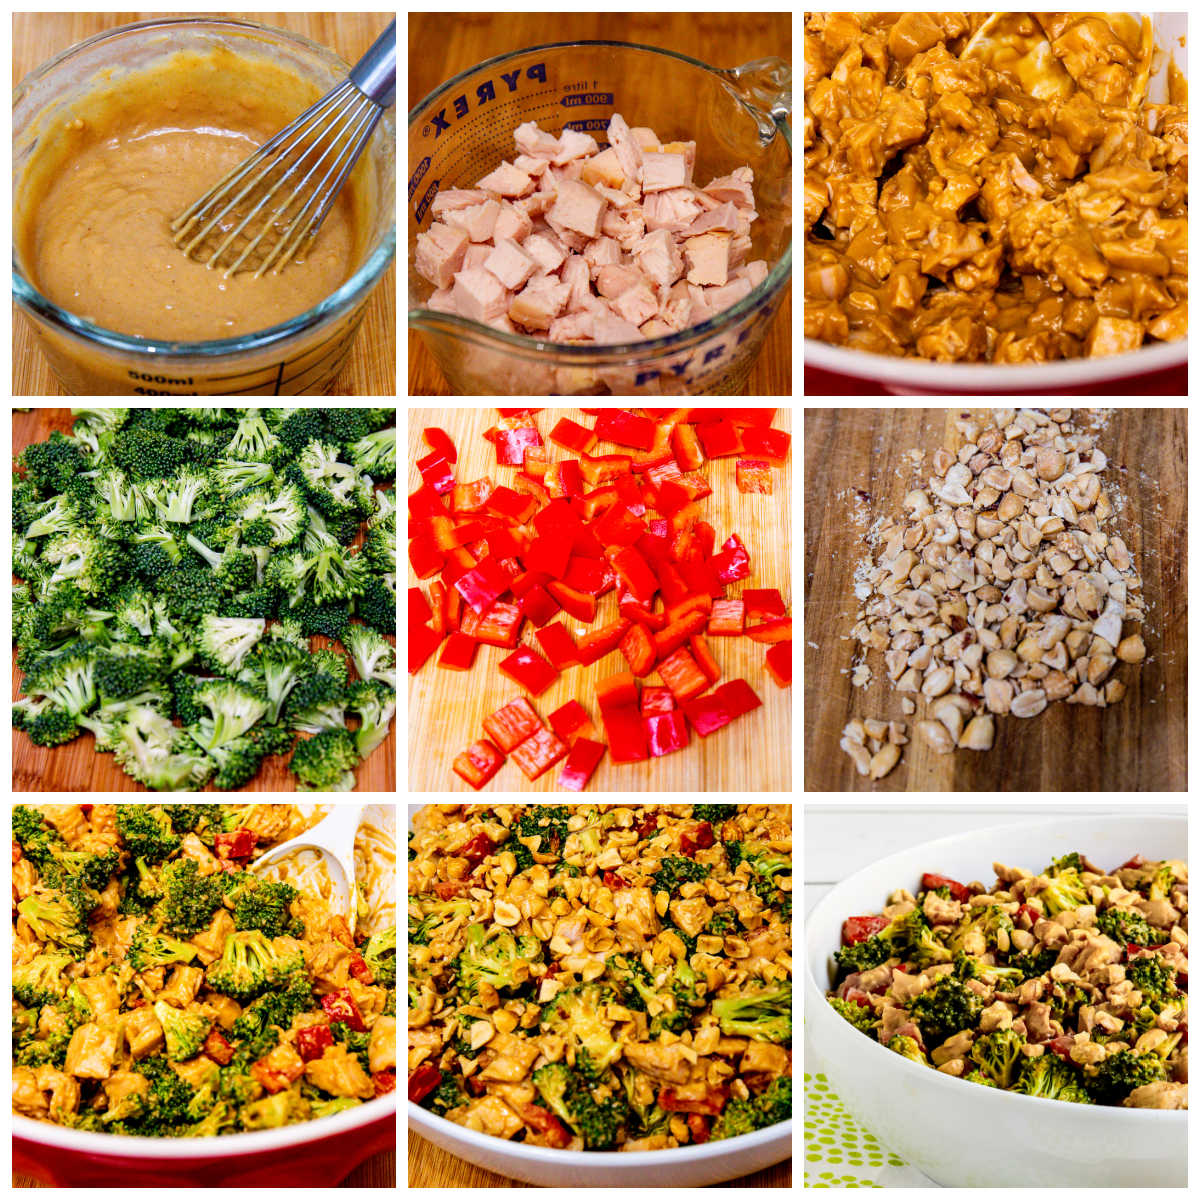 Process shots collage for Chicken Broccoli Salad showing steps for the recipe